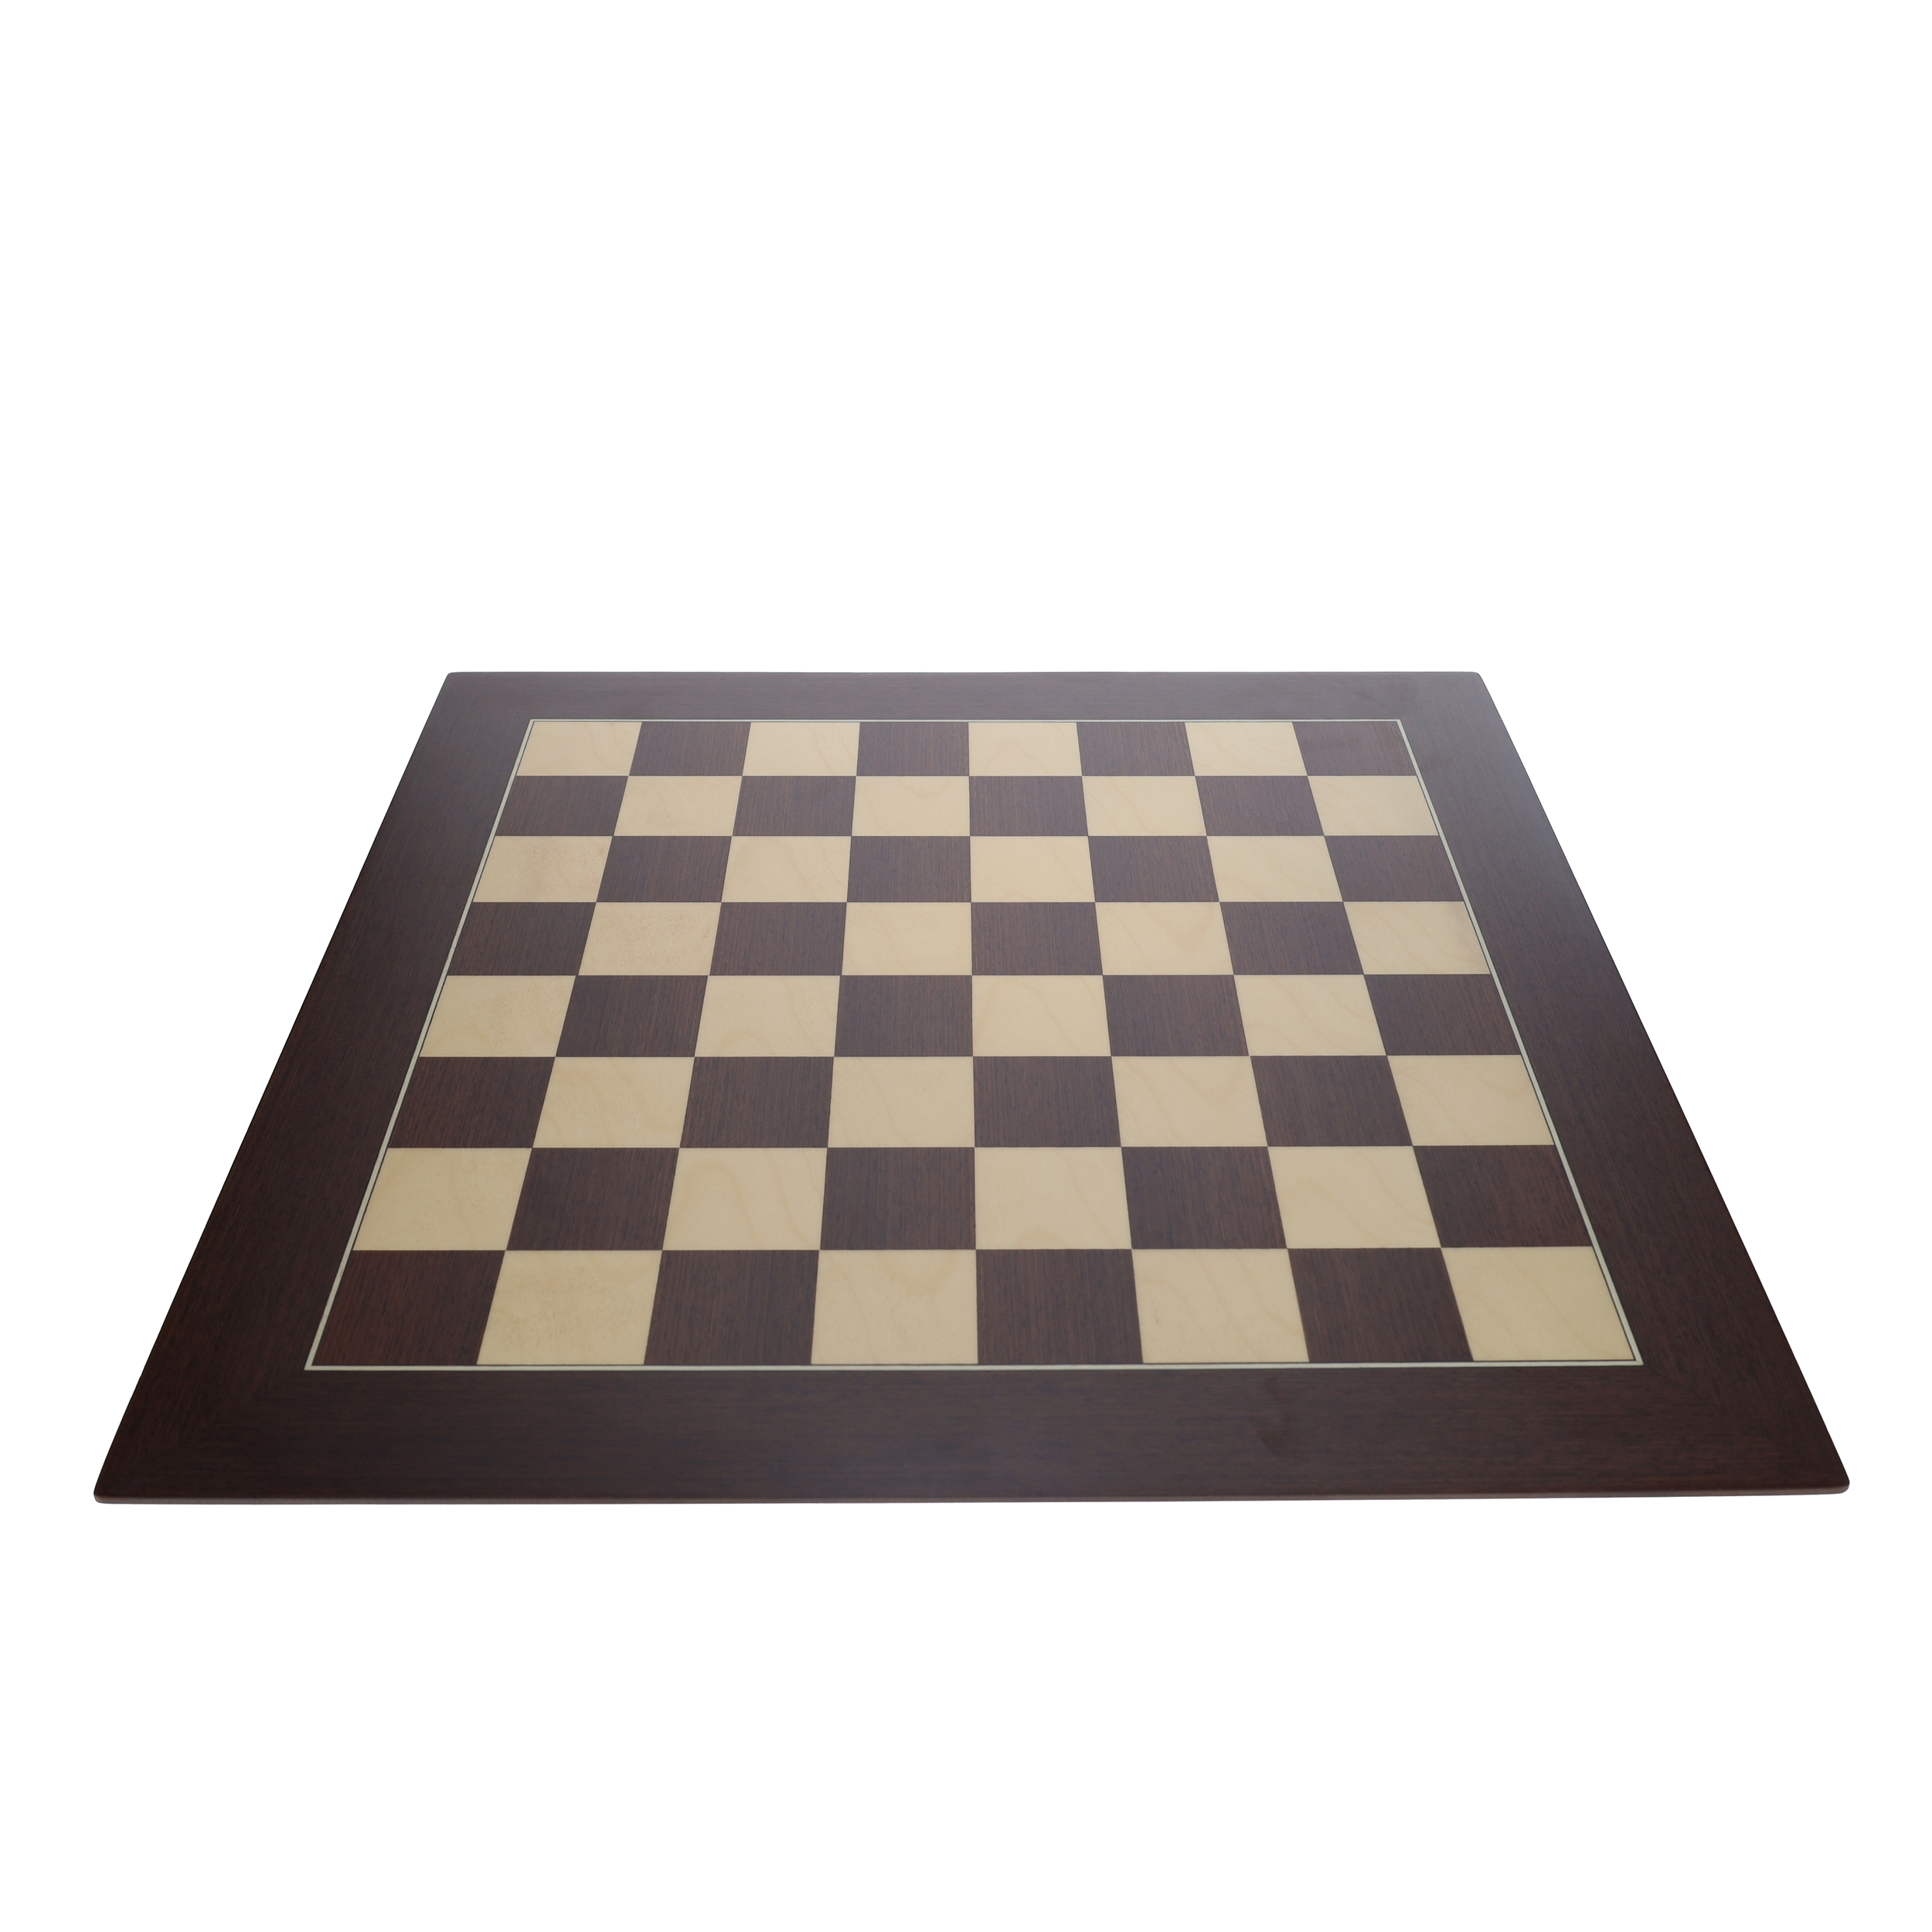 Bobby Fischer® Ultimate Chess Set with Deluxe Wooden Chess Board